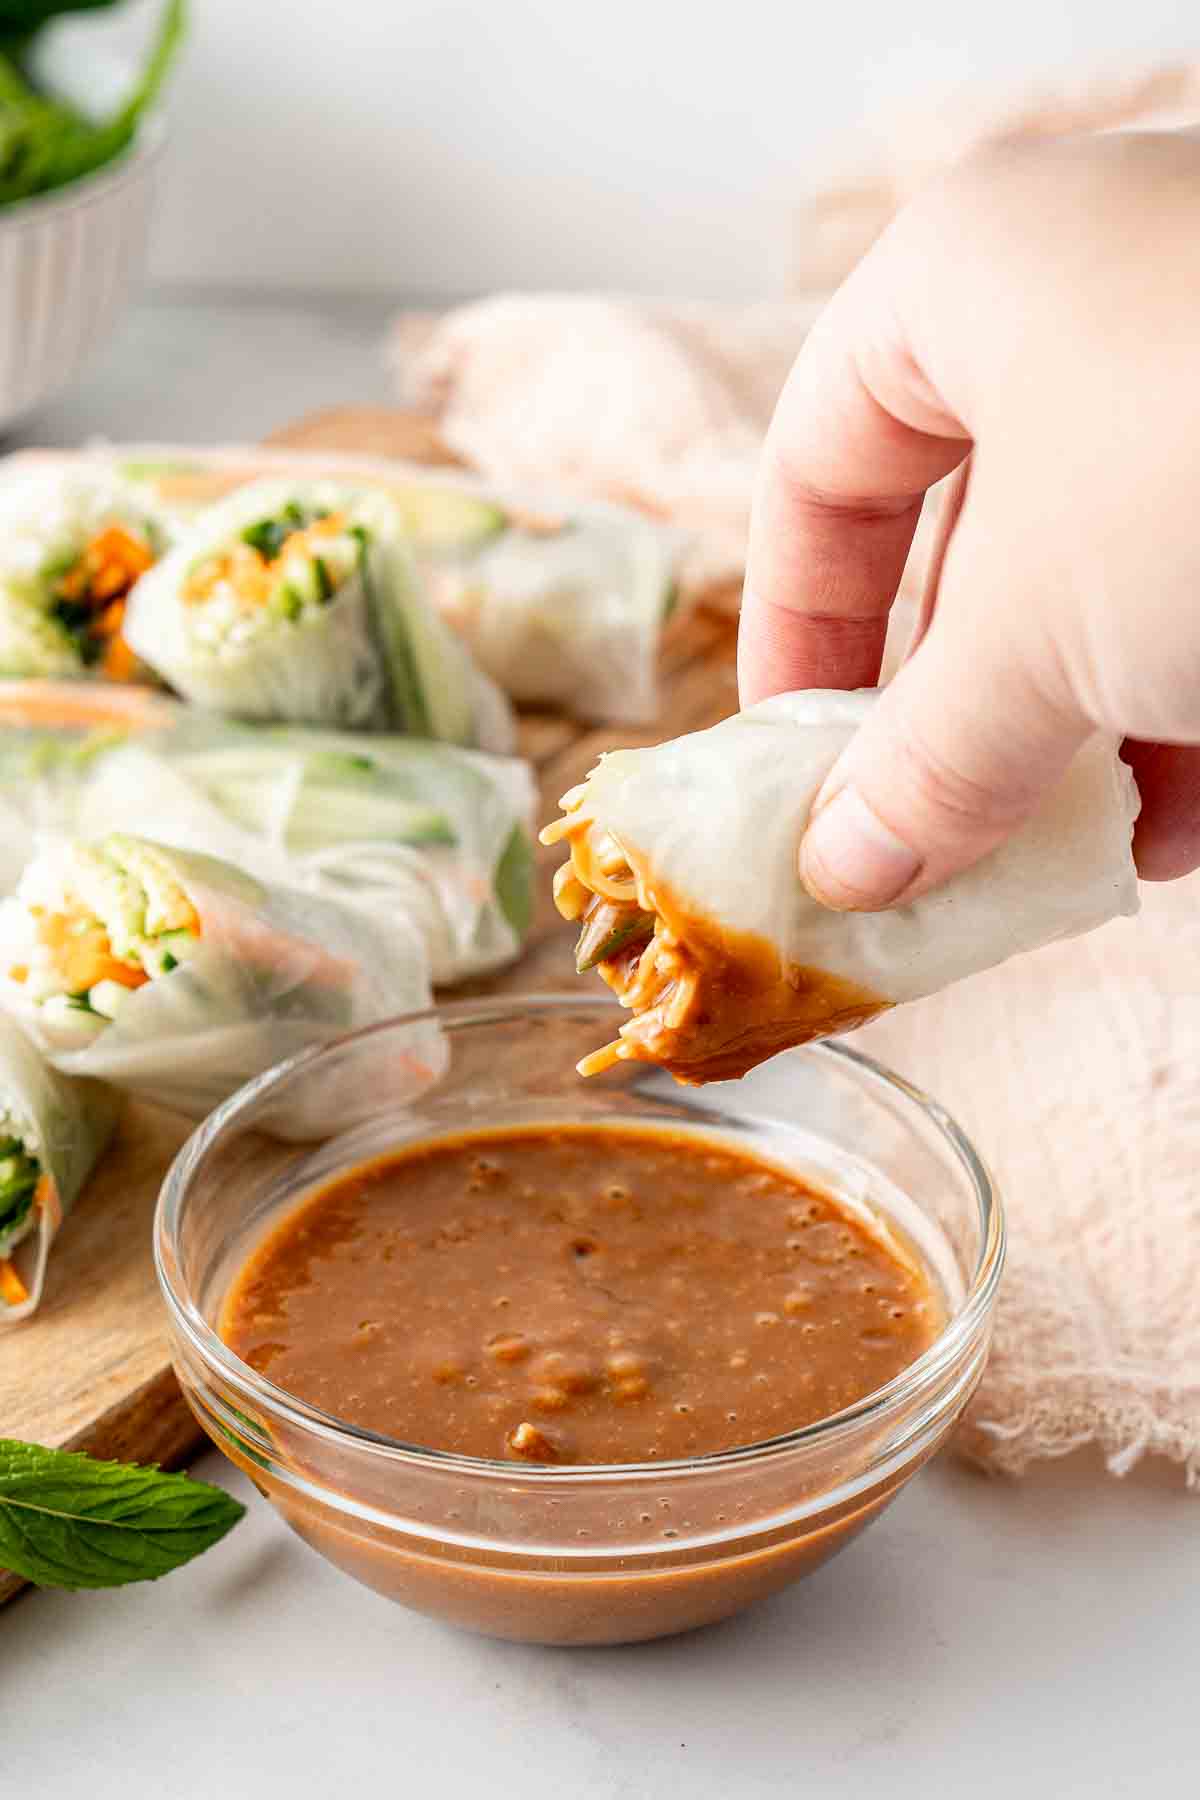 Rice paper roll being dunked in creamy peanut sauce.